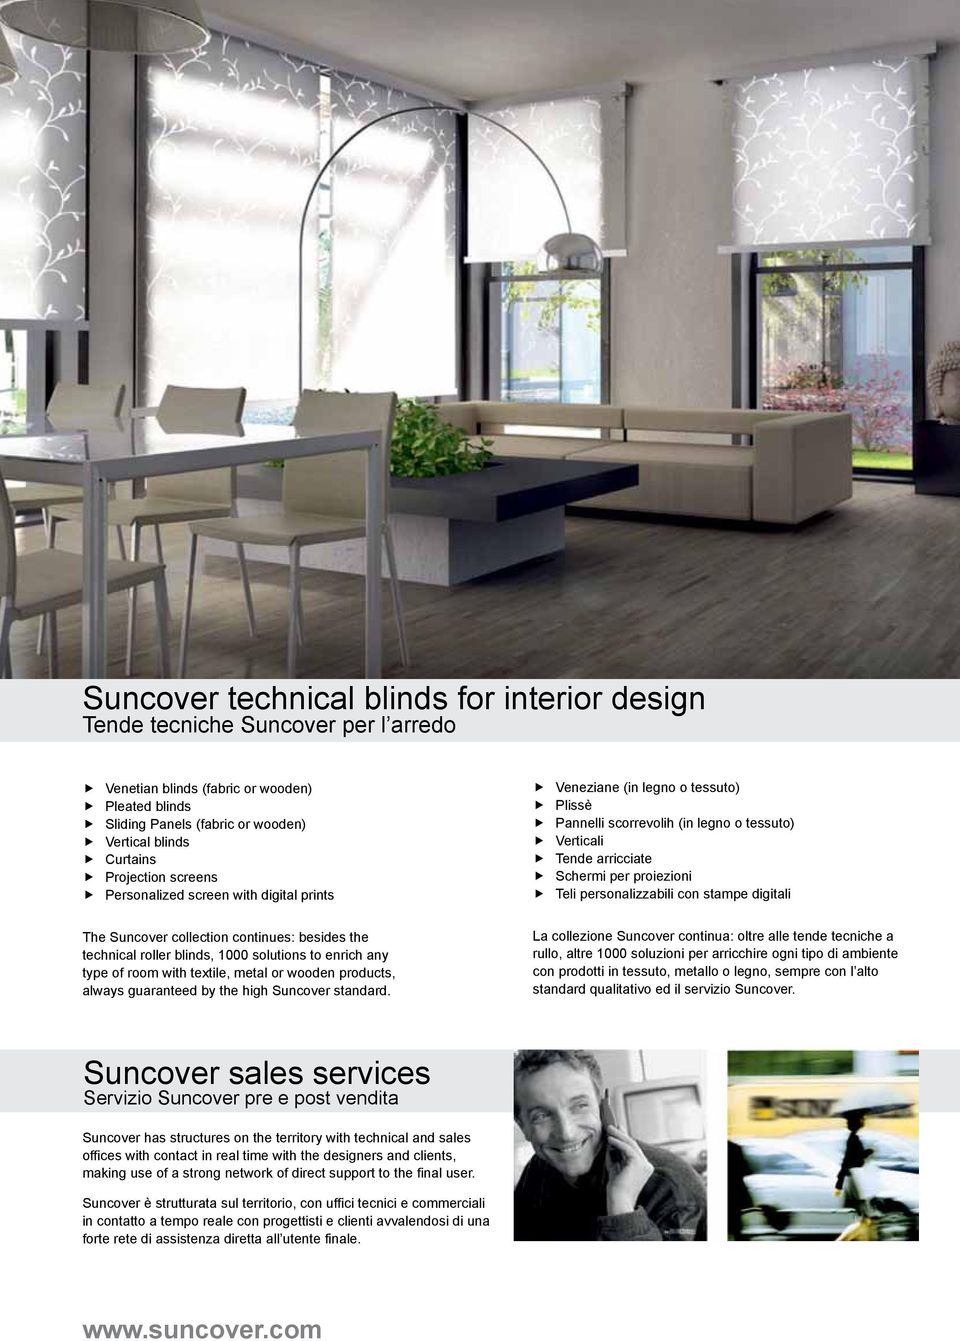 personalizzabili con stampe digitali The Suncover collection continues: besides the technical roller blinds, 1000 solutions to enrich any type of room with textile, metal or wooden products, always